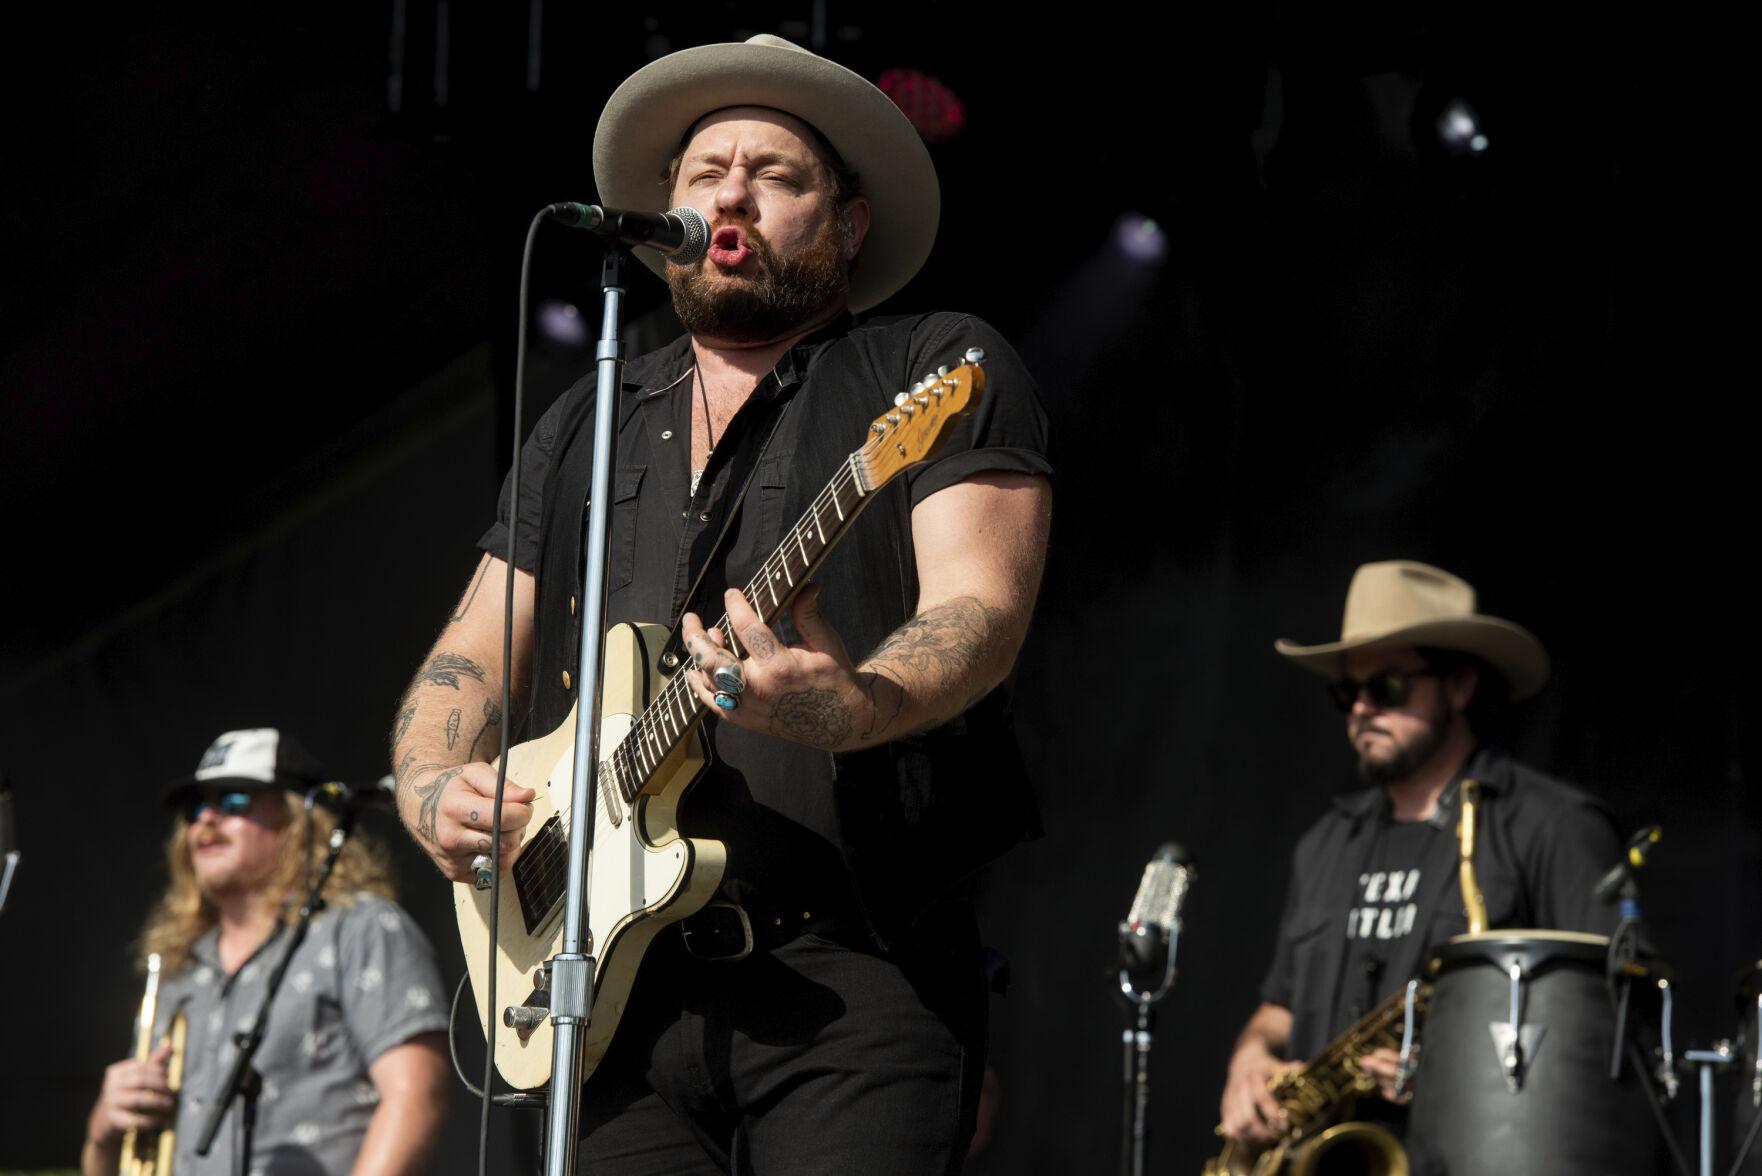 Nathaniel Rateliff offering 5 shows at Red Rocks in Colorado Arts